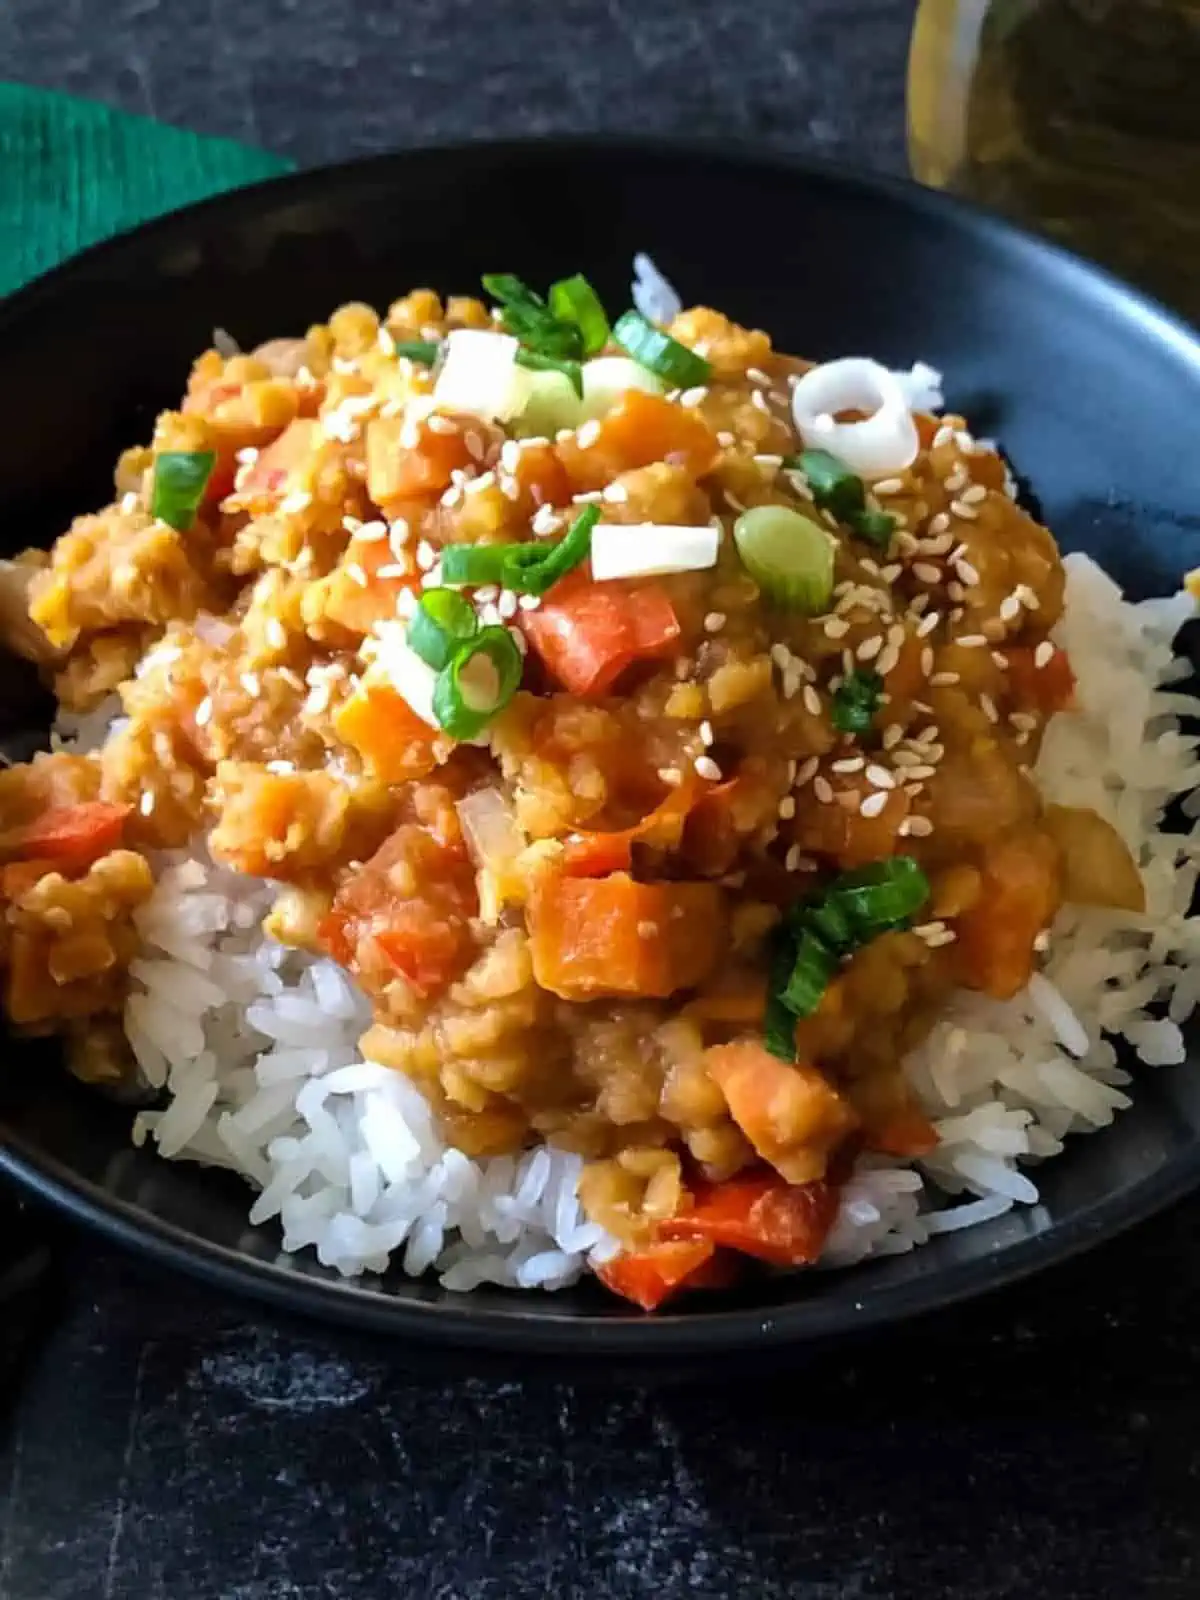 A bowl of Korean-flavored red lentils served over rice.